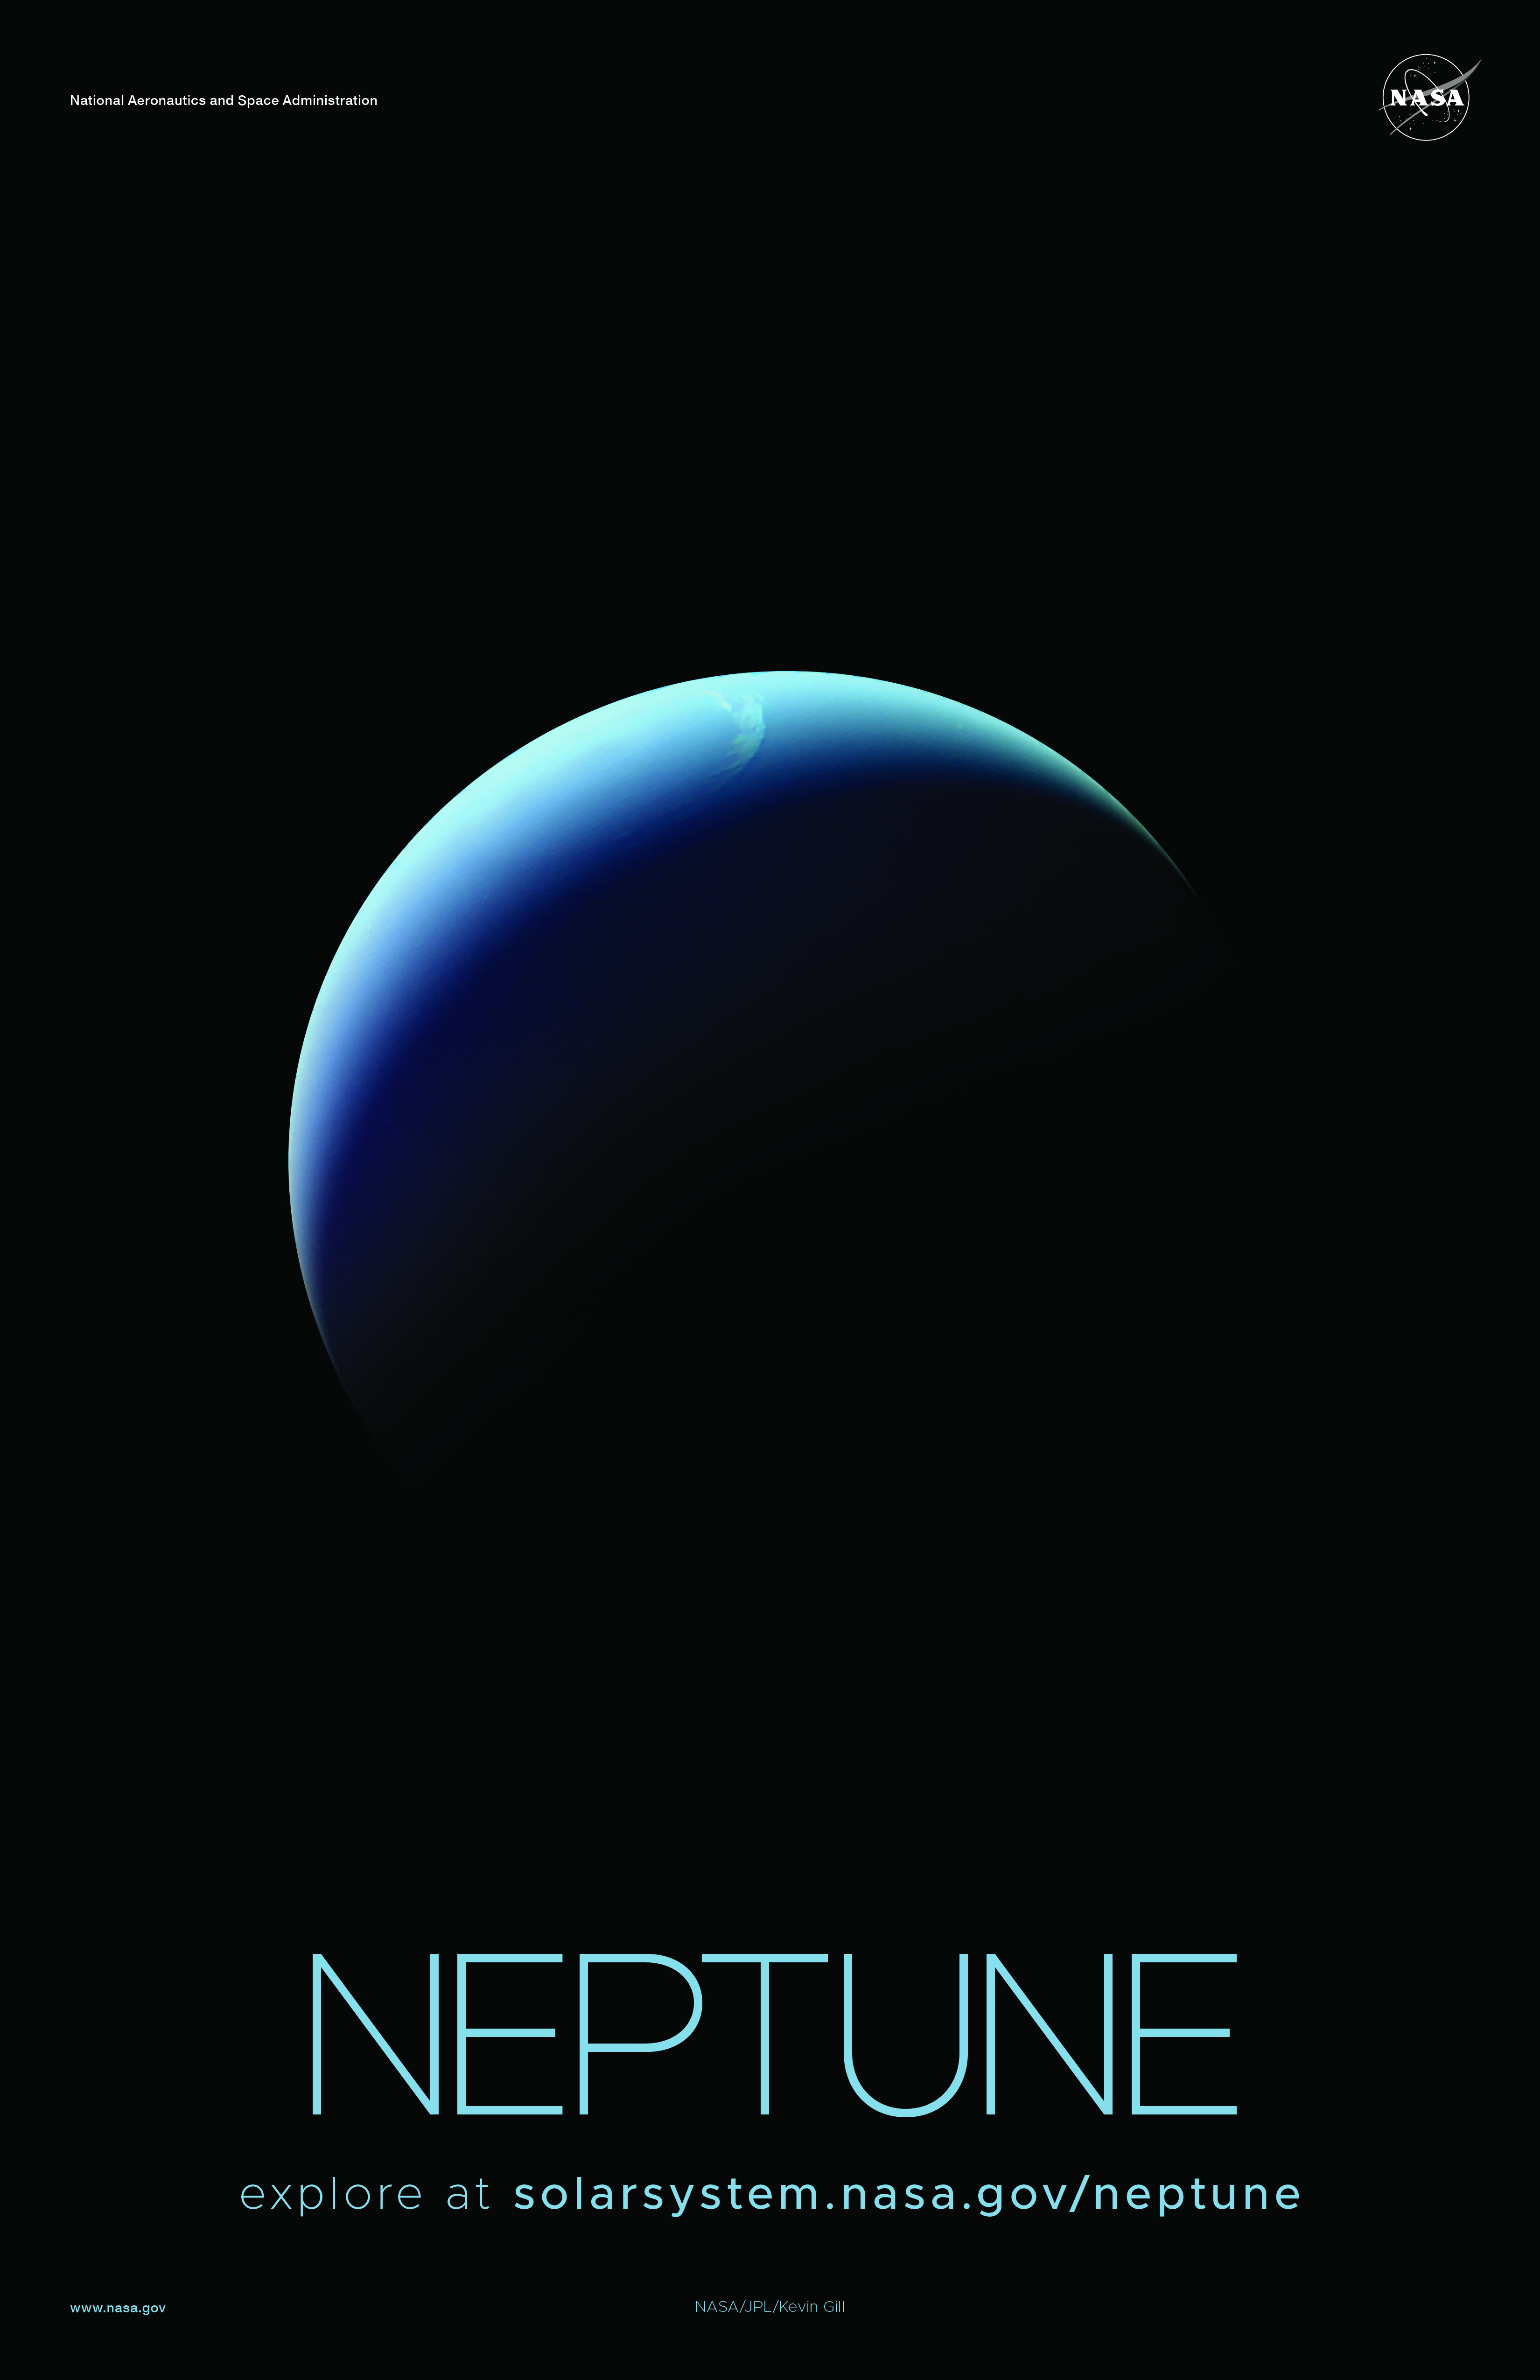 A crescent view of the planet Neptune is shown with a black backdrop.